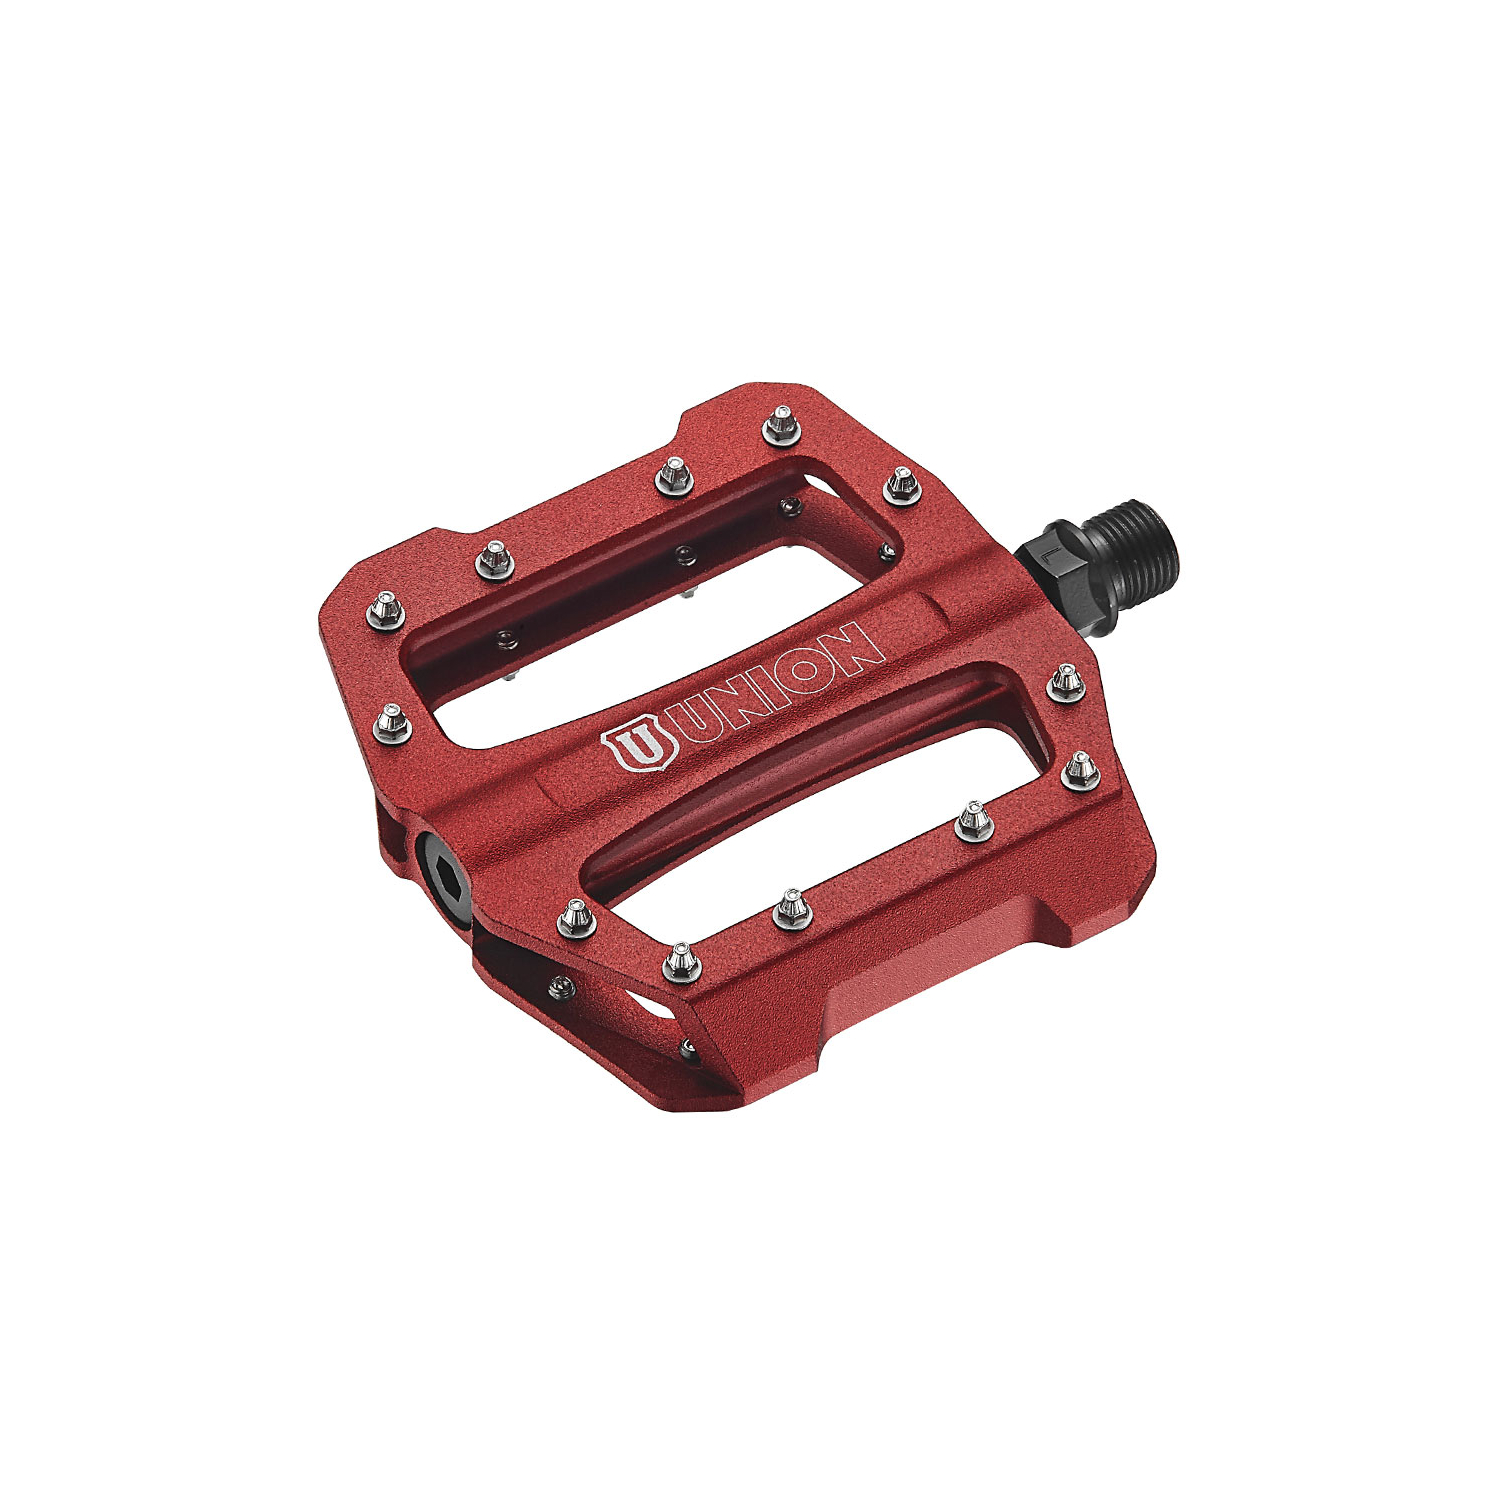 BMX-Pedal ALU UNION SP 1300 Nadellager in Rot